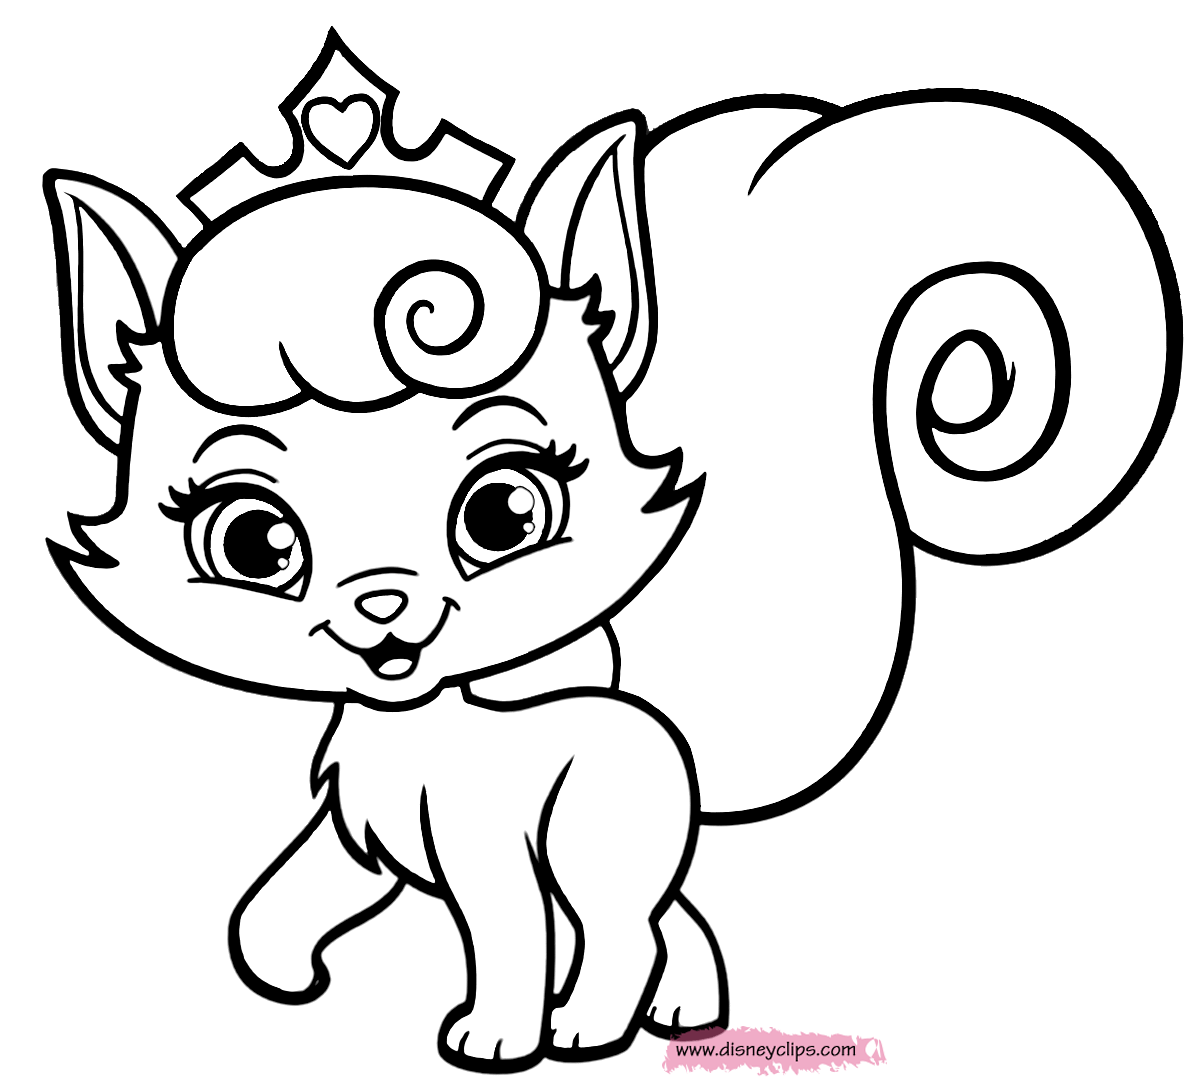 Kitten And Puppy Coloring Pages To Print   Coloring Home